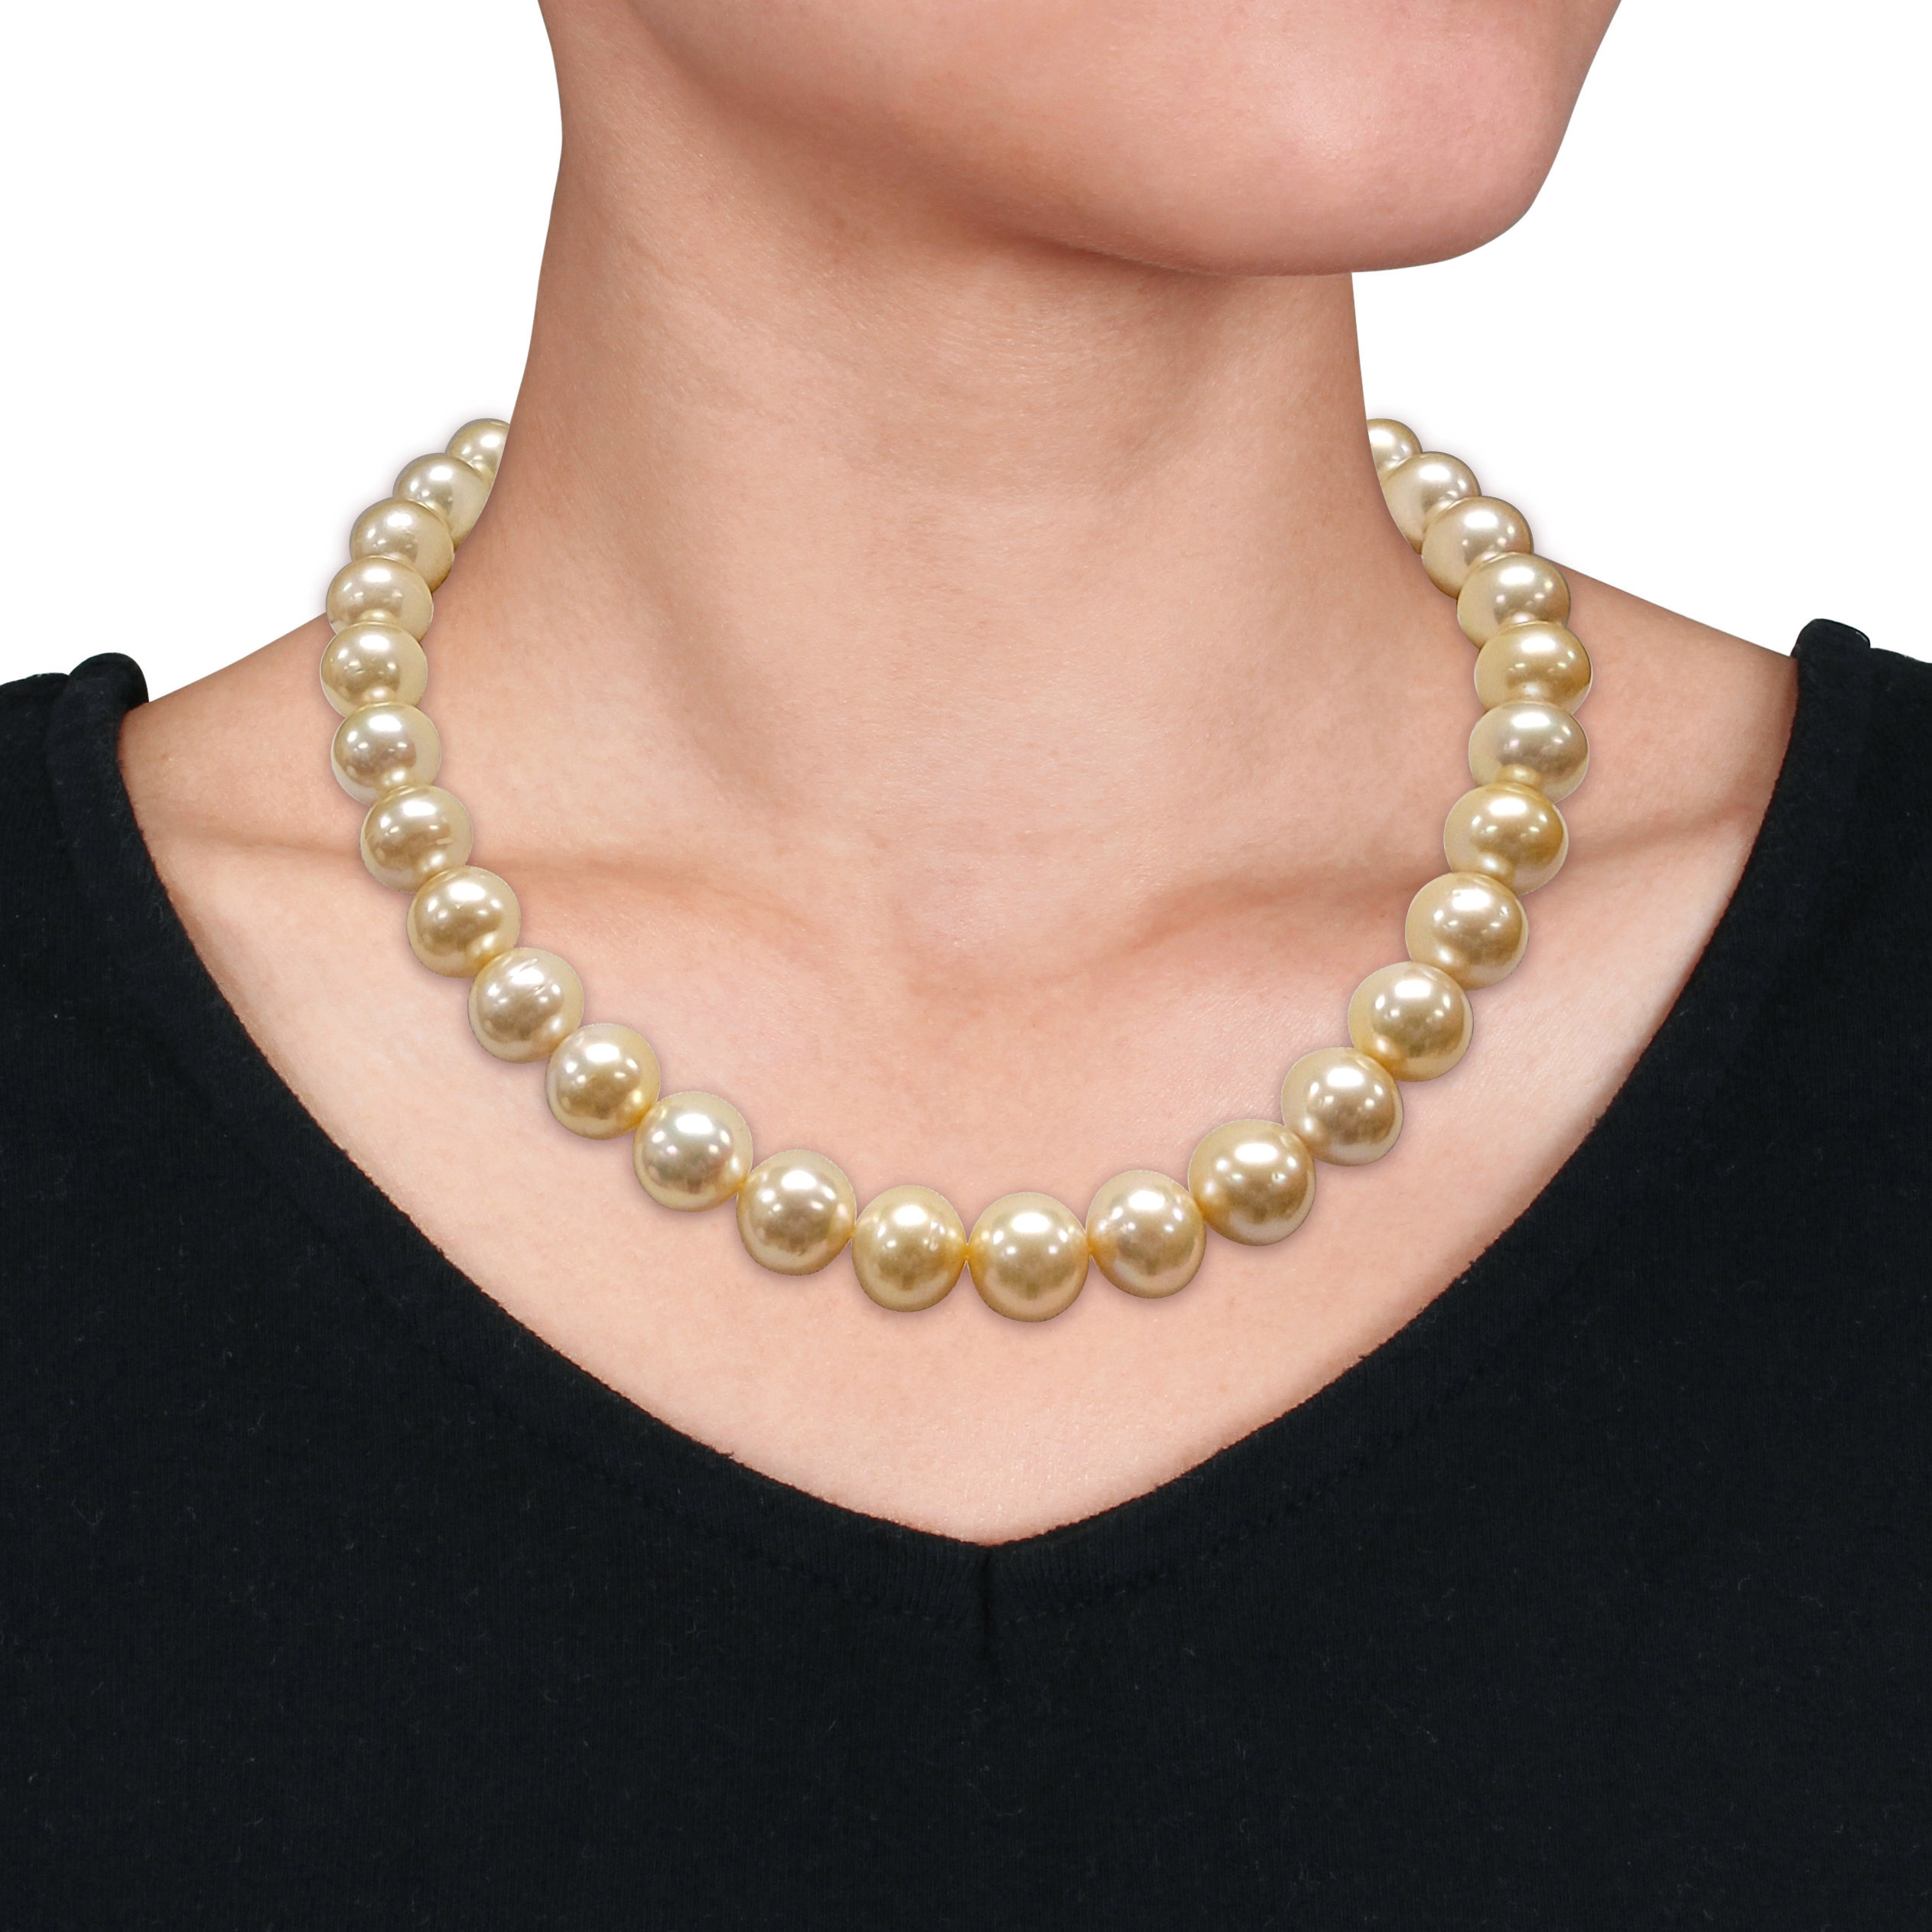 13-14 MM Golden South Sea Cultured Pearl Strand Necklace with 14k Yellow Gold Ball Clasp with Diamond Accents - 18 in.